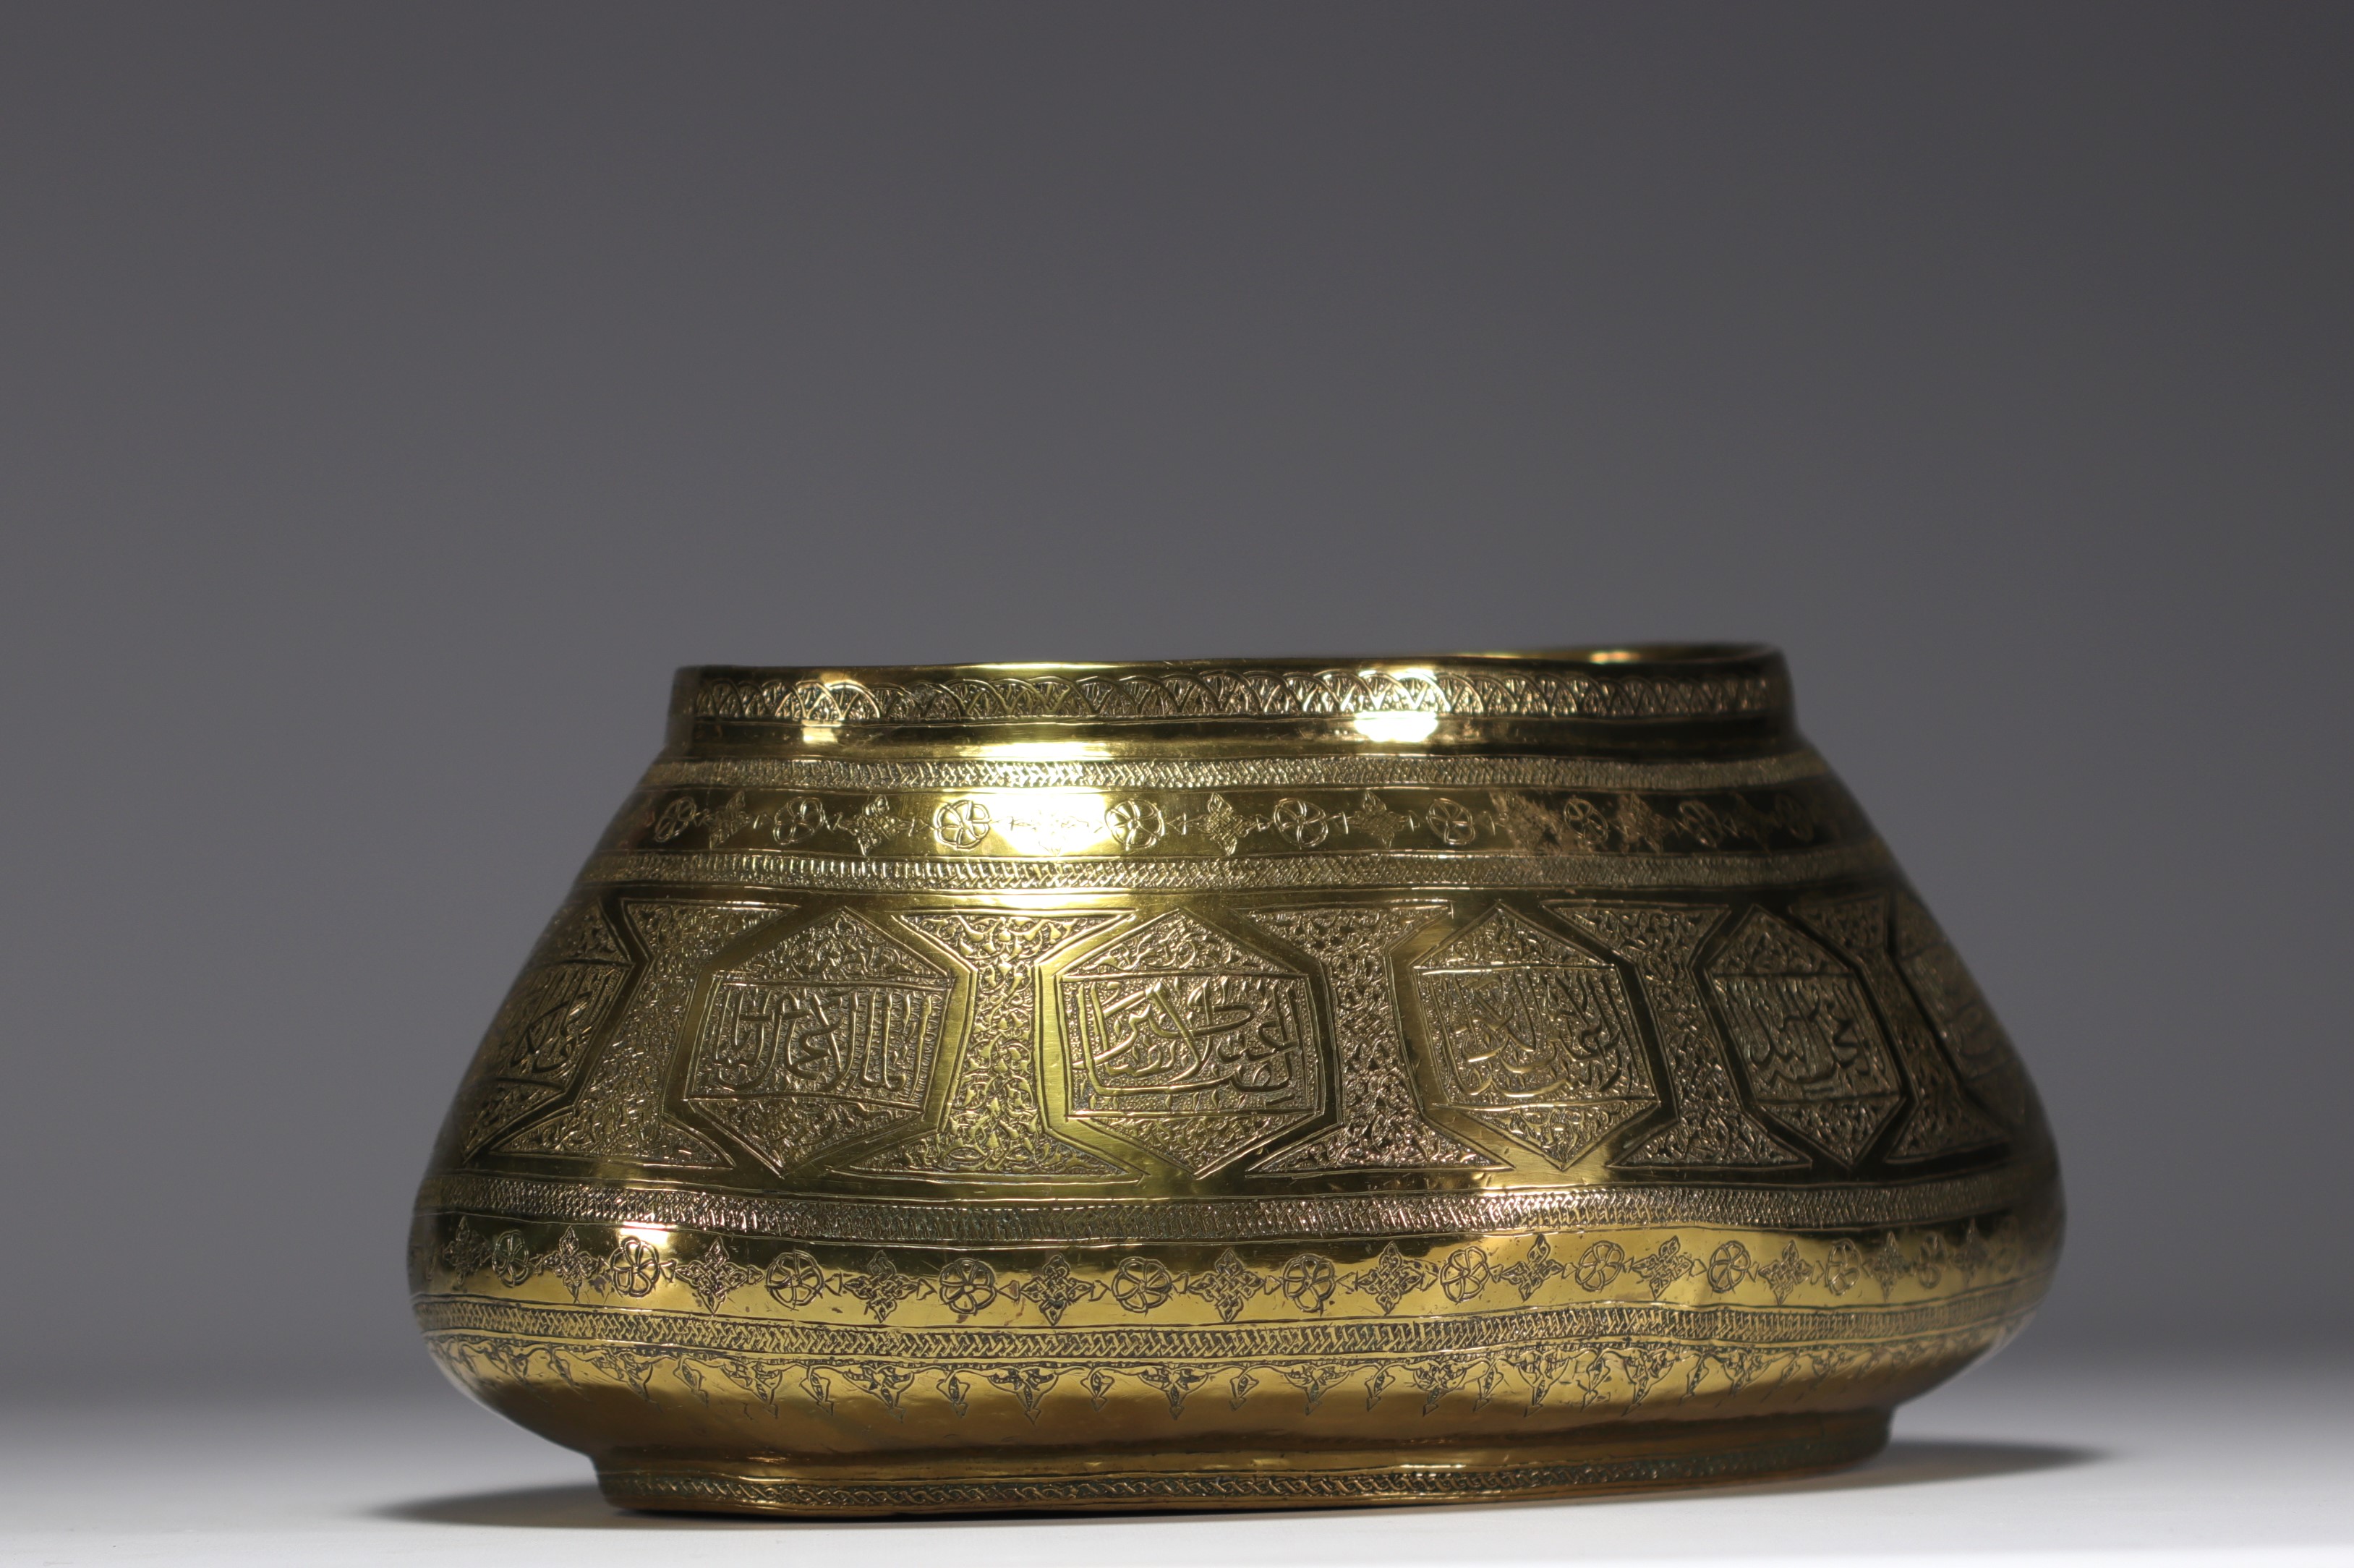 Iran - An old chased brass "Tas" basin decorated with flowers and wishes, 19th century.